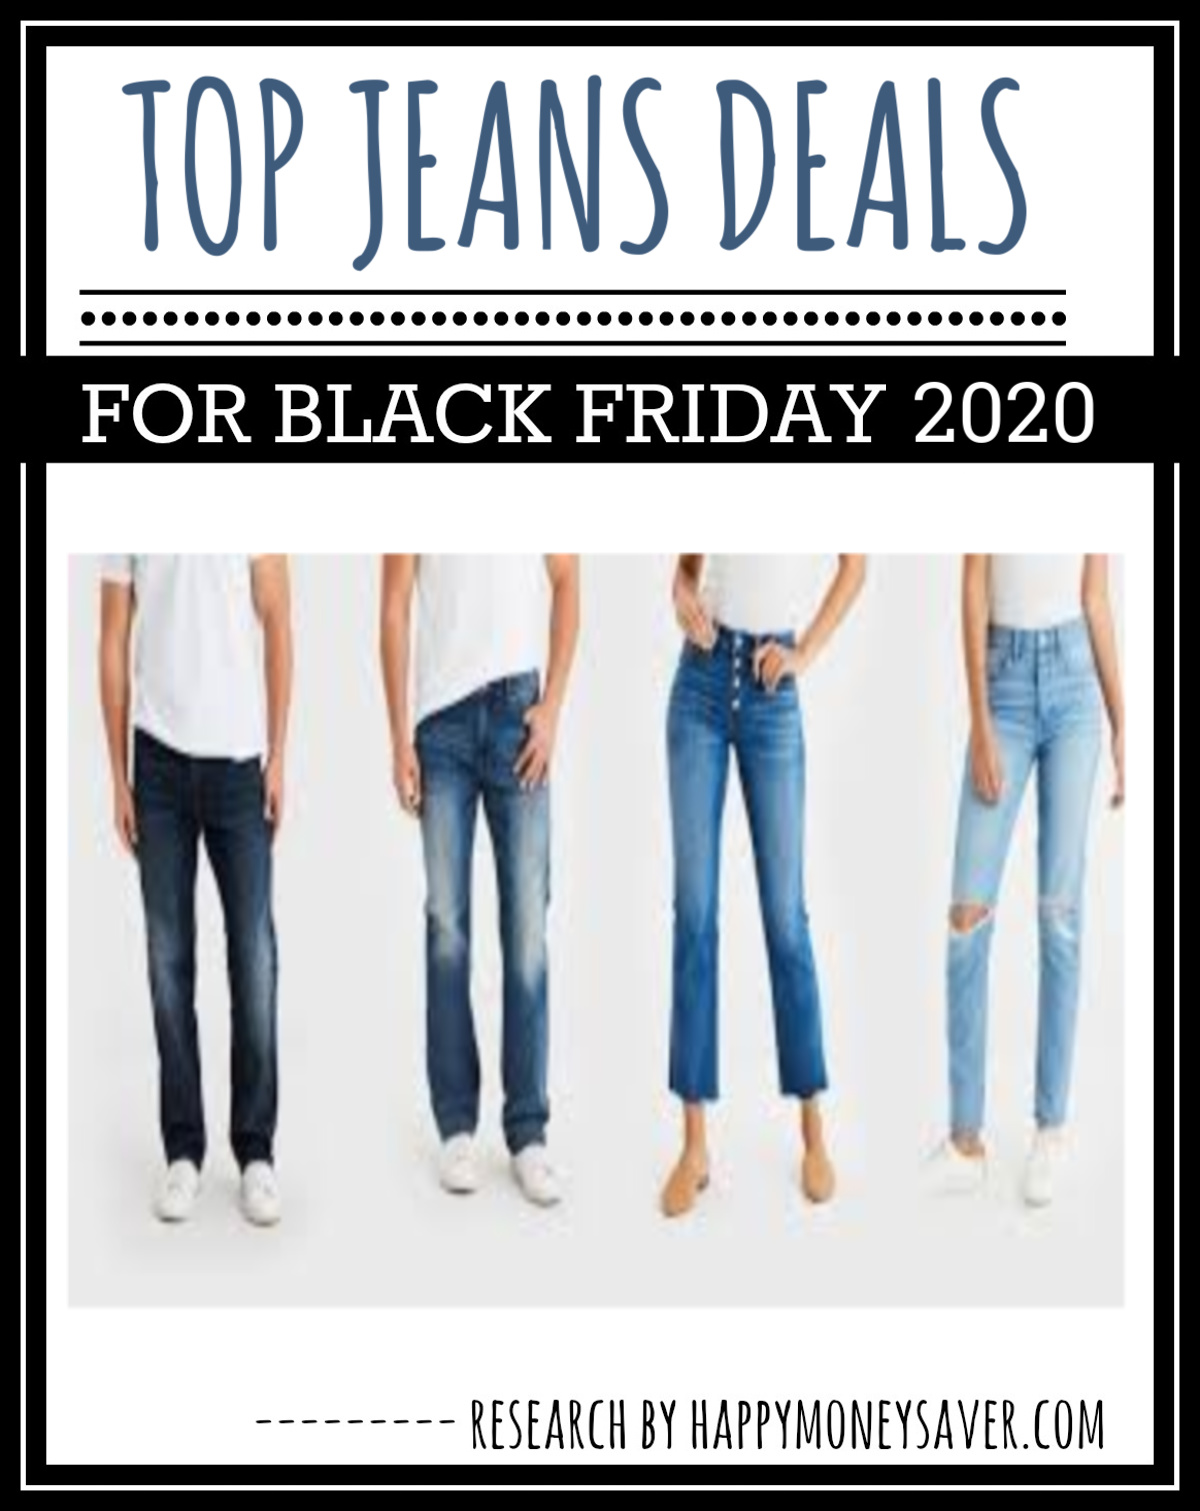 black friday deals on levi's jeans